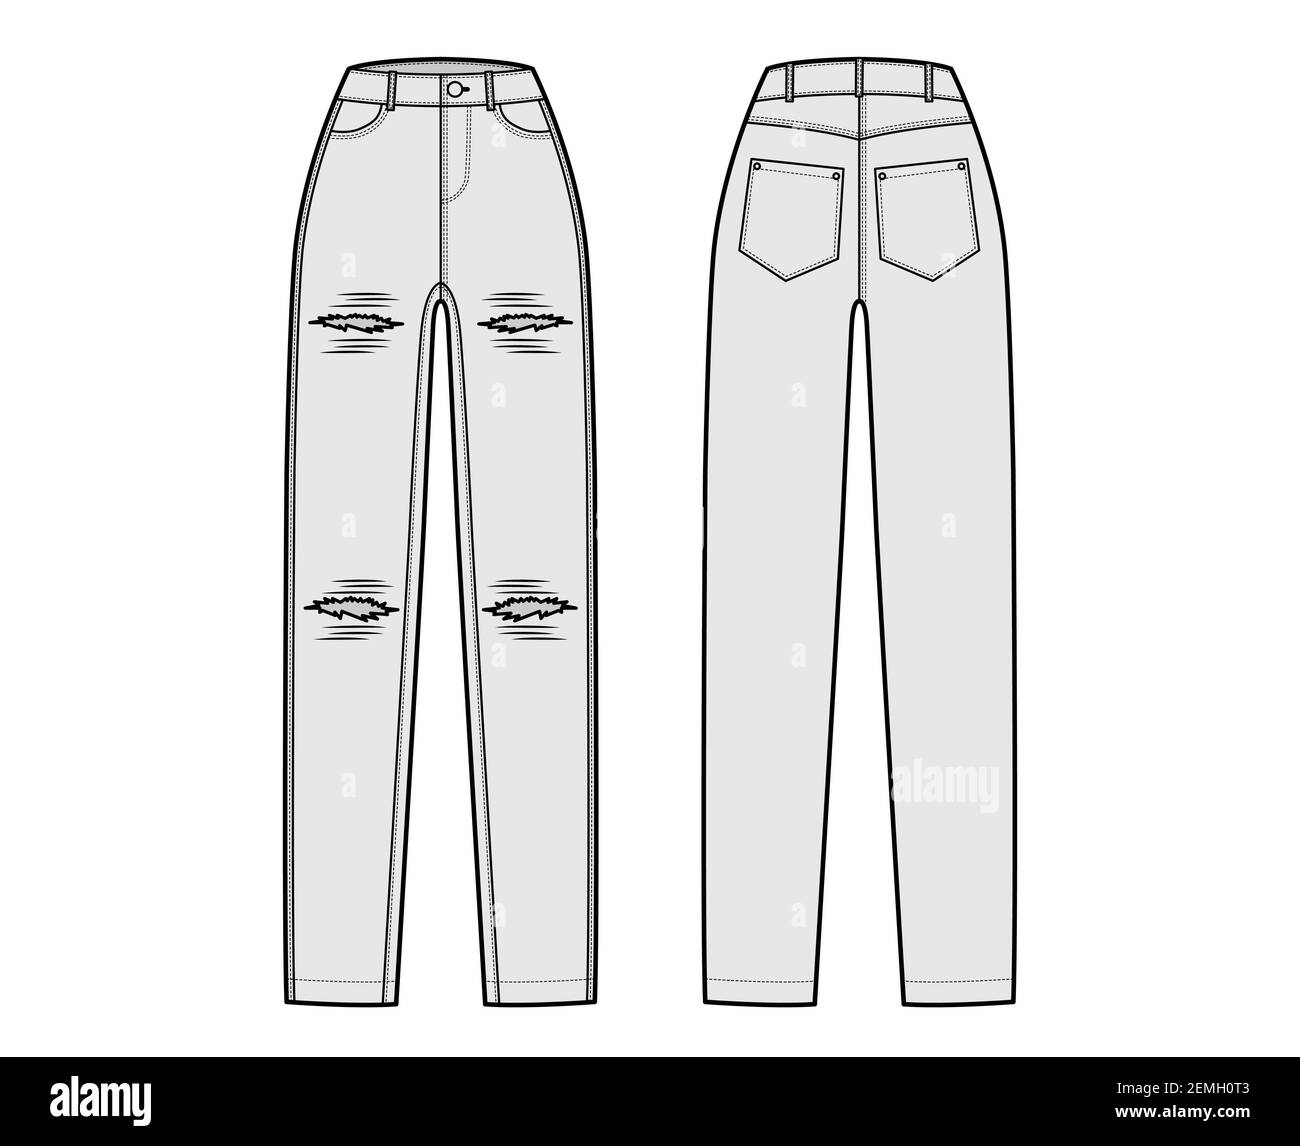 Ripped Jeans distressed Denim pants technical fashion illustration with  full length, normal waist, rise, coin, angled